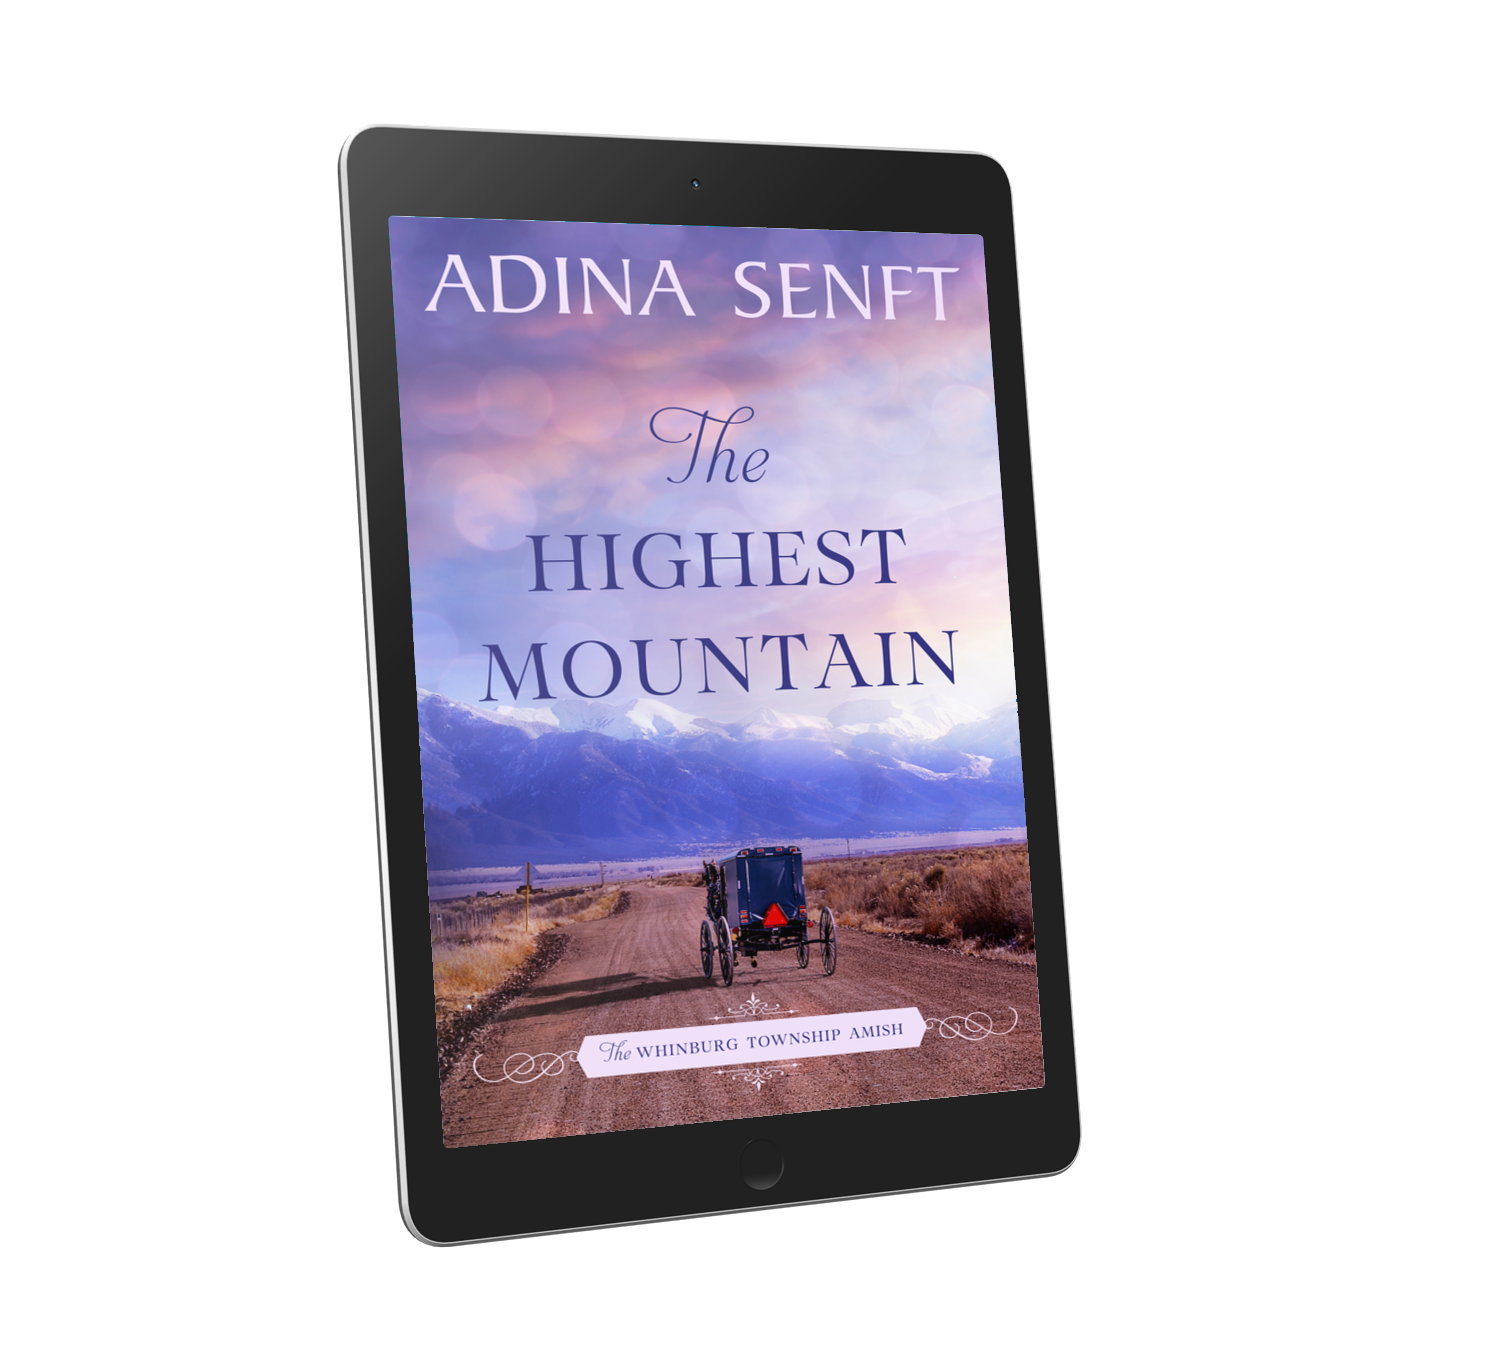 The Highest Mountain by Adina Senft, book 8 in The Whinburg Township Amish series